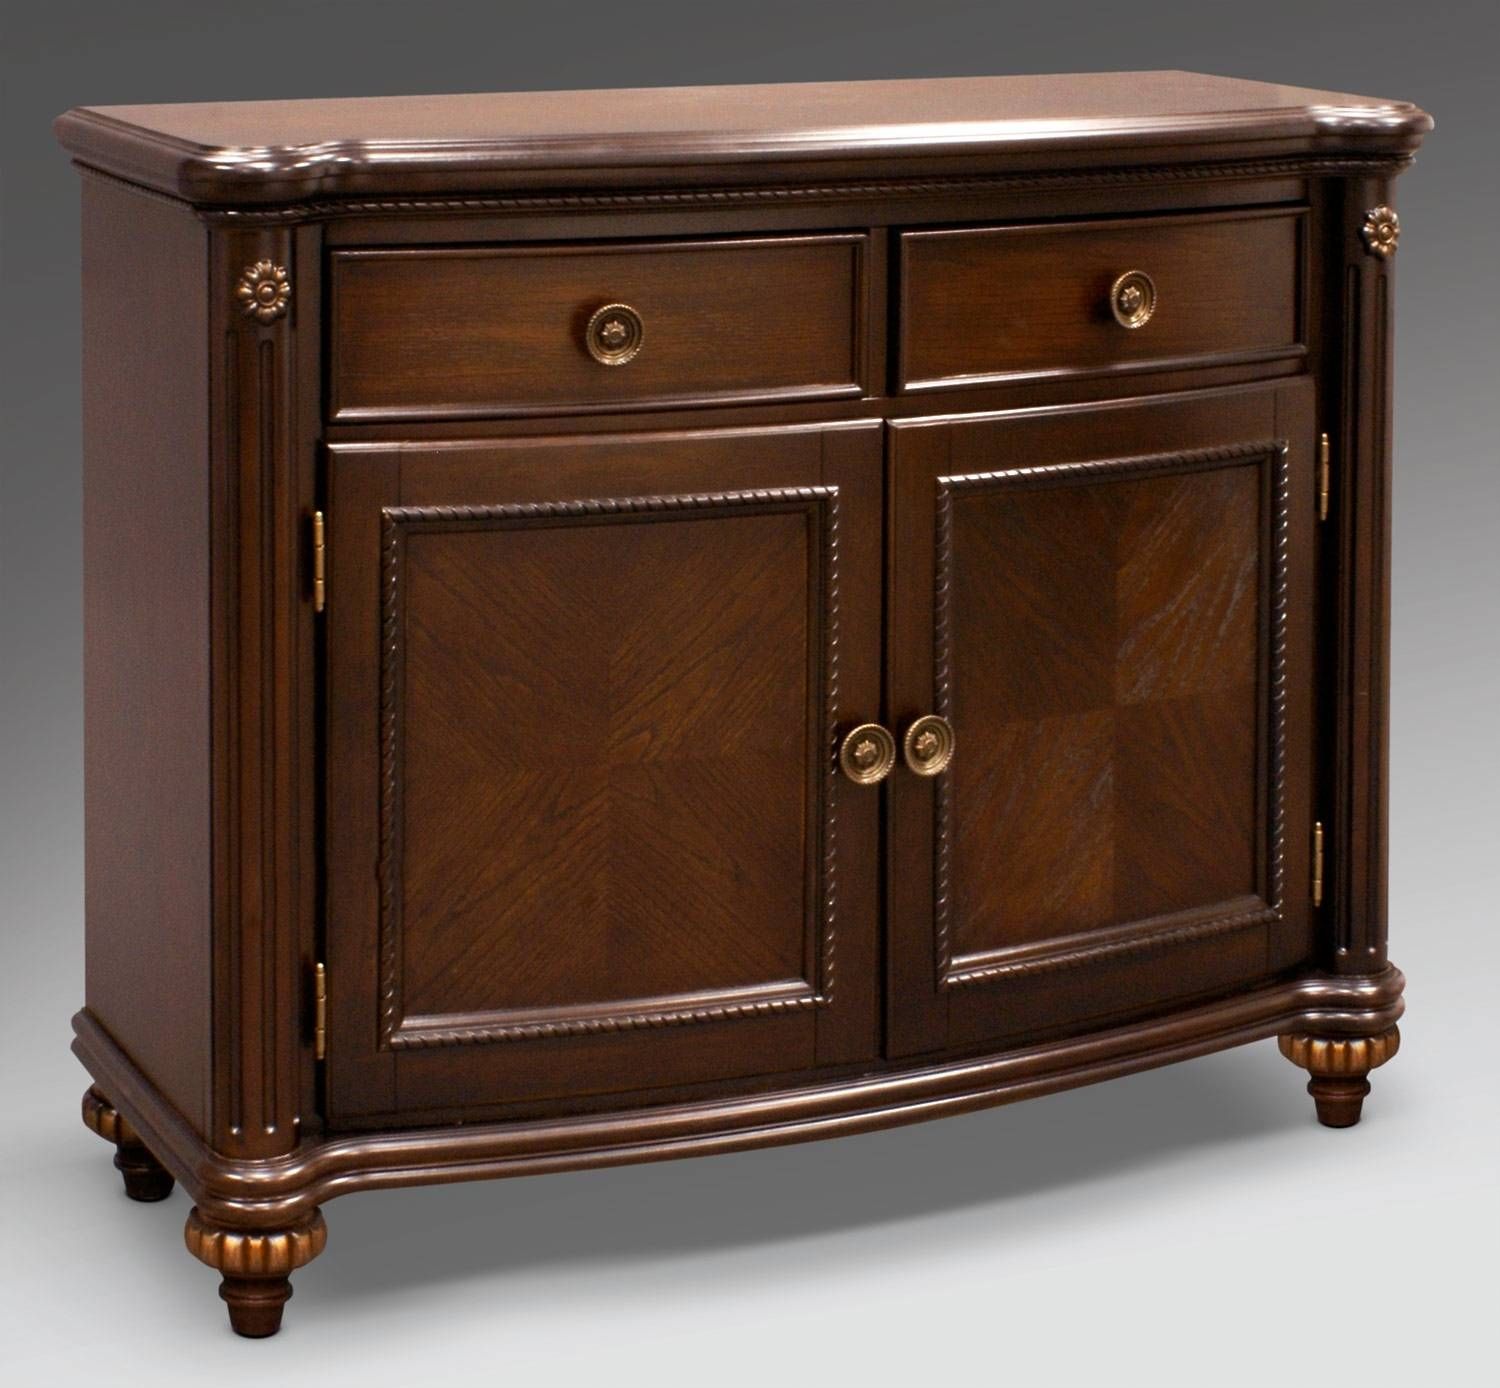 Dining Room Servers Buffet Furniture Pictures Cabinet Trends And For Buffets And Sideboards Cabinet (View 7 of 20)